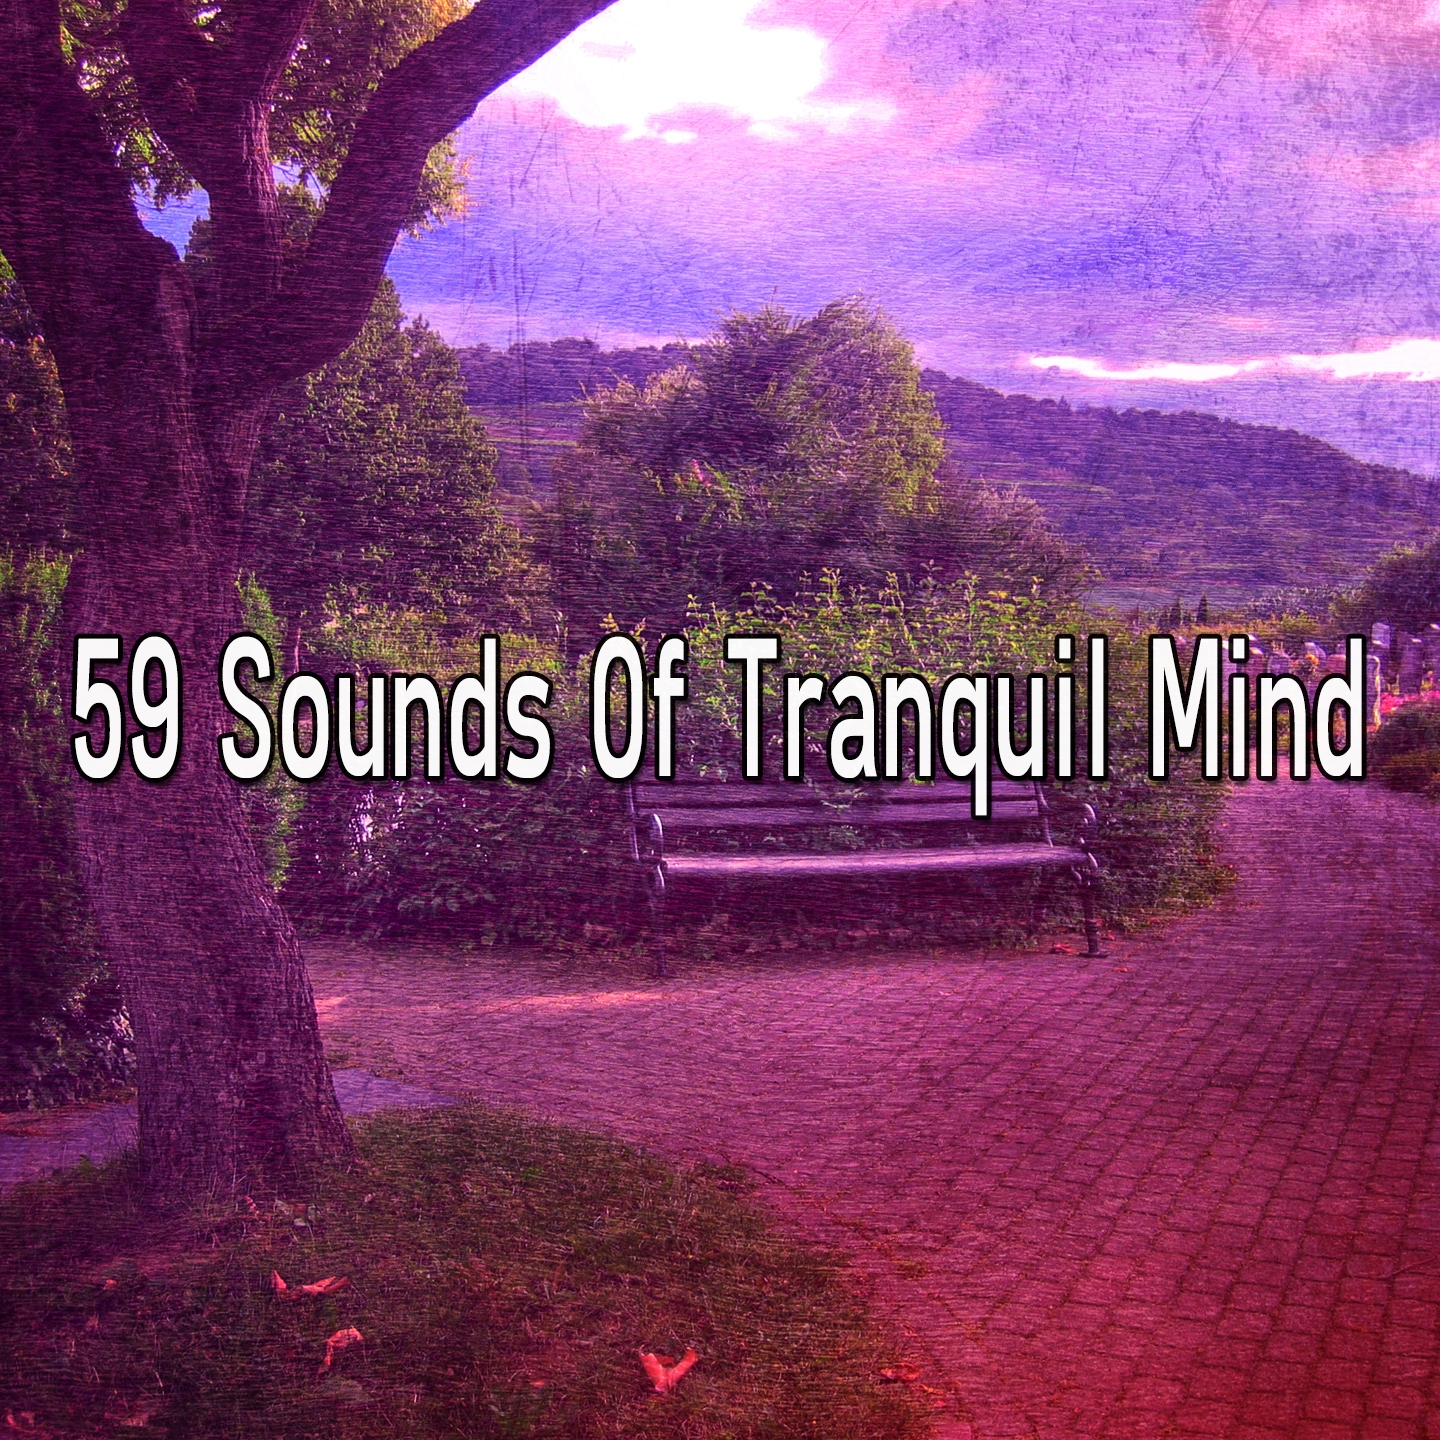 59 Sounds Of Tranquil Mind